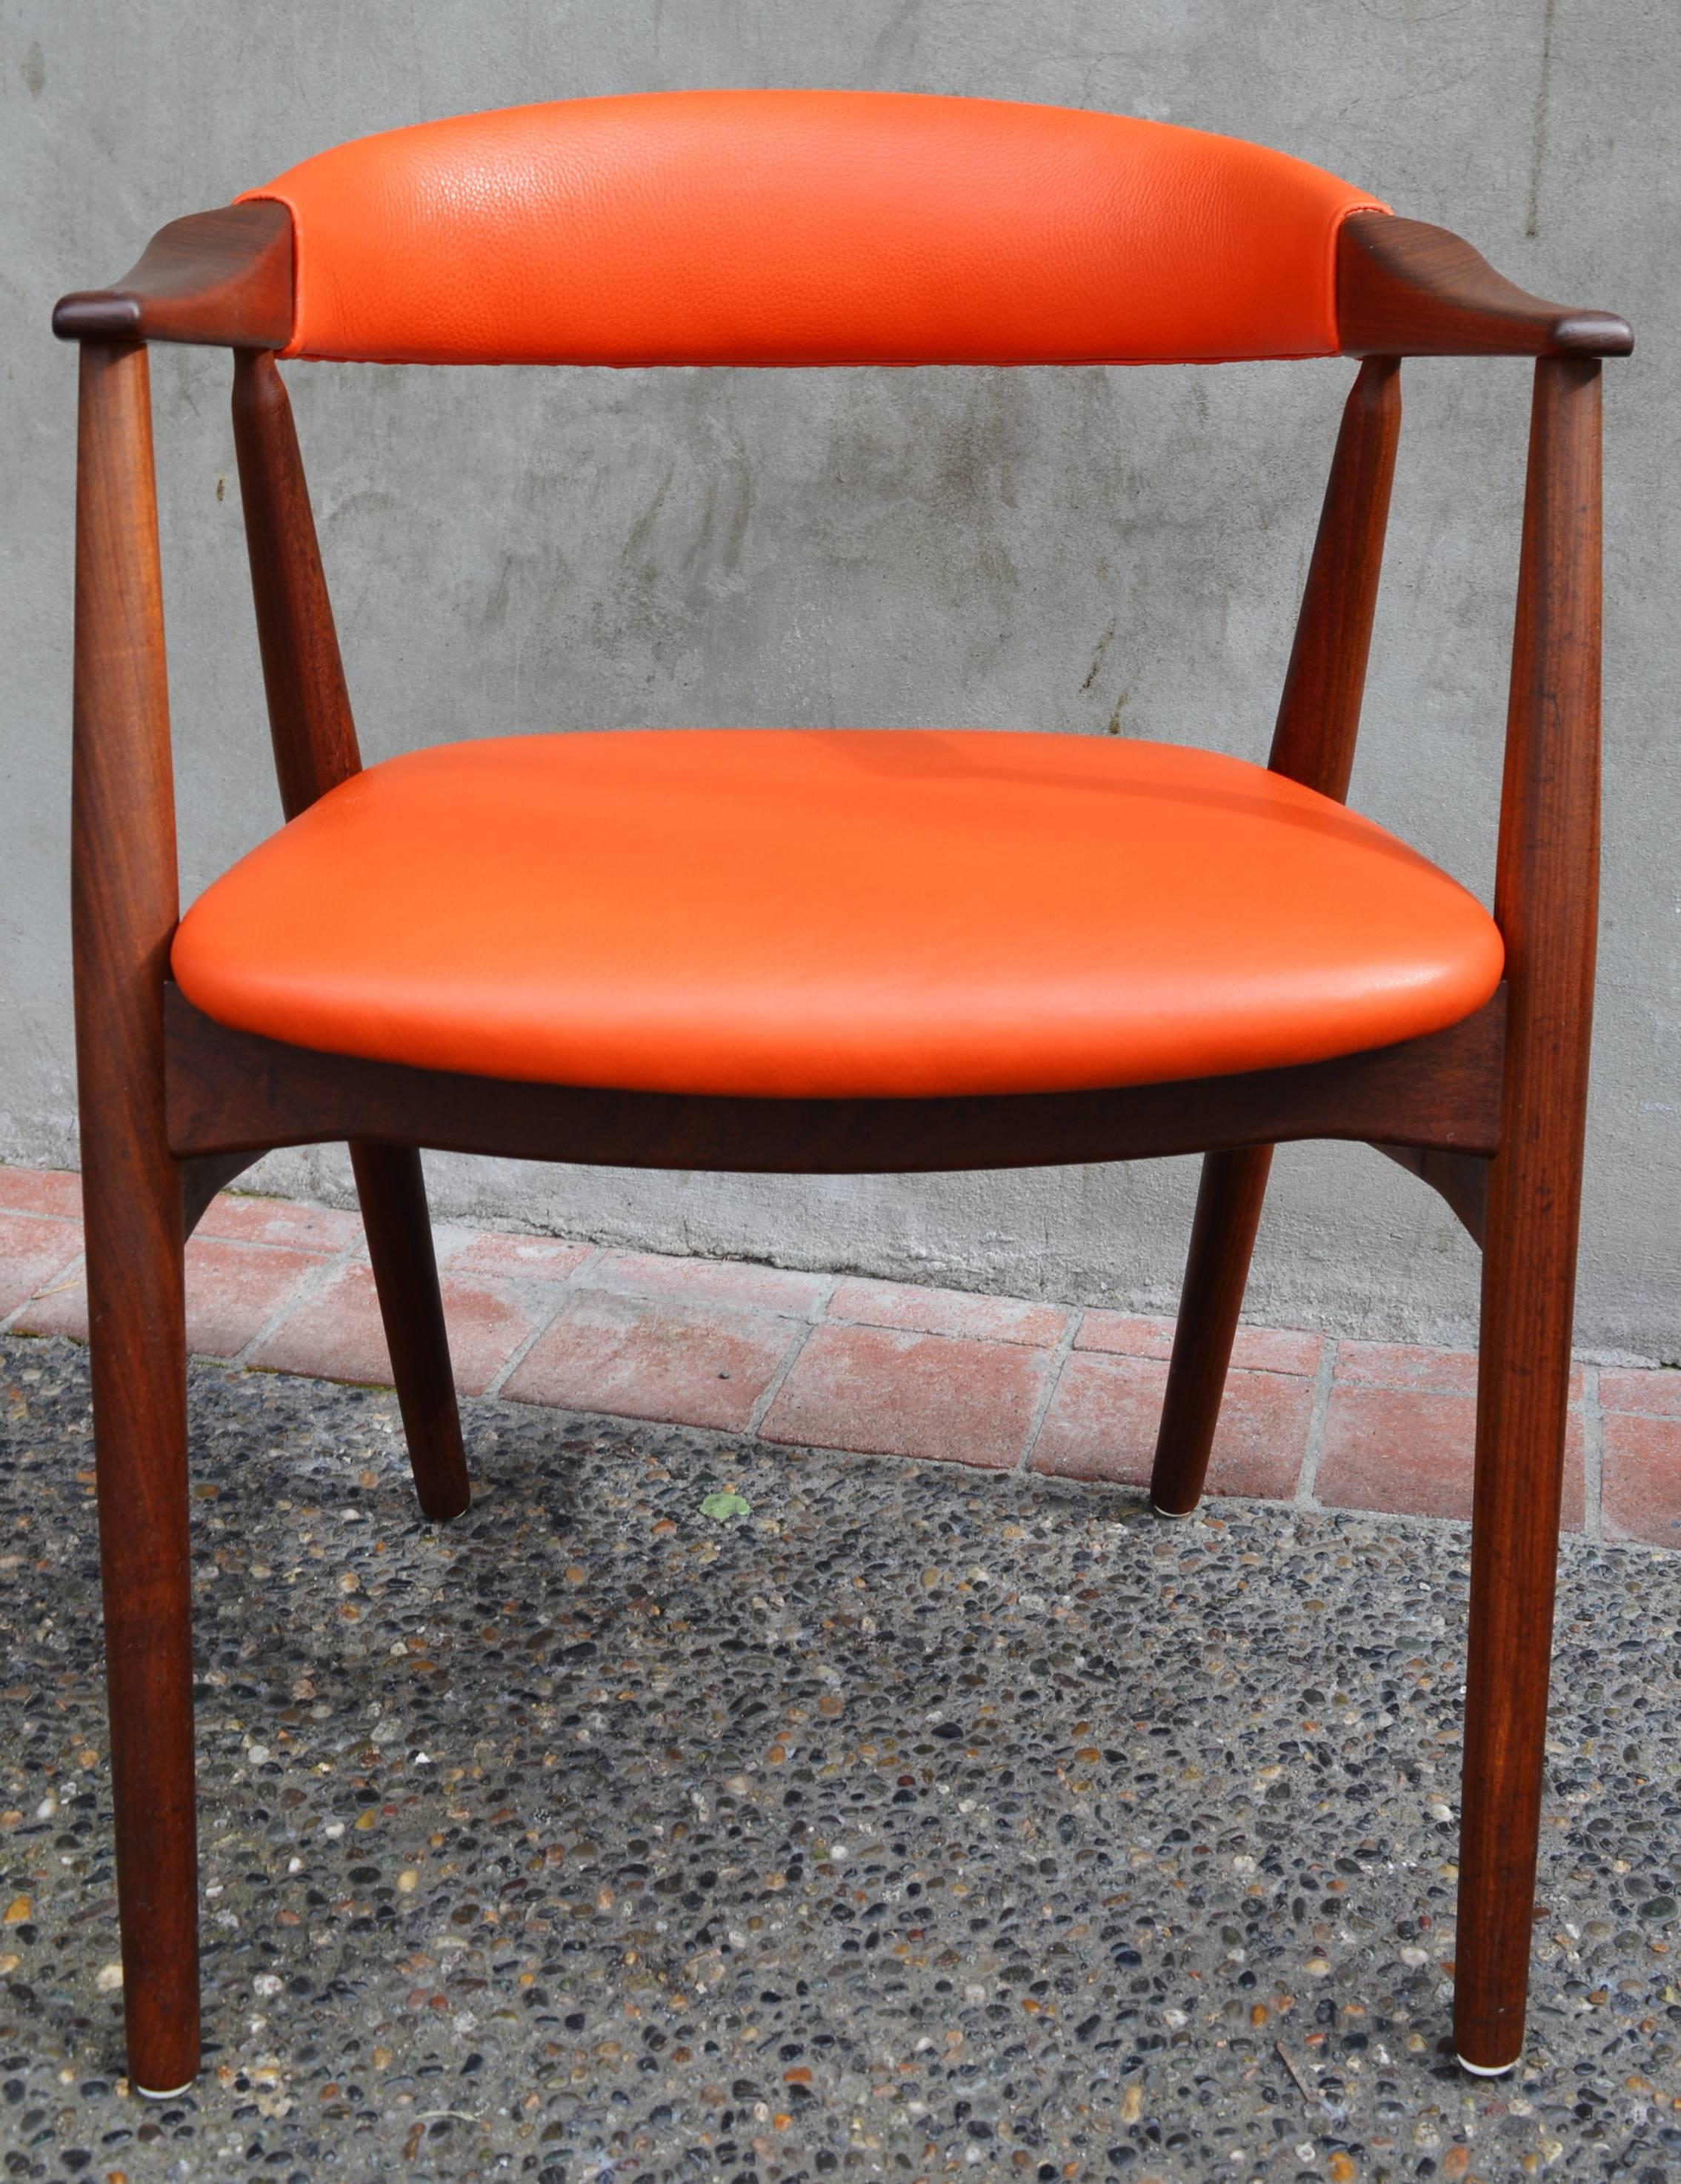 This gorgeous Danish Modern restored desk or side chair was designed by Kai Kristiansen and was reupholstered in a lovely rich orange quality leather with all new 25 year foam. Perfect as a desk chair or side chair with curves, style and beauty.